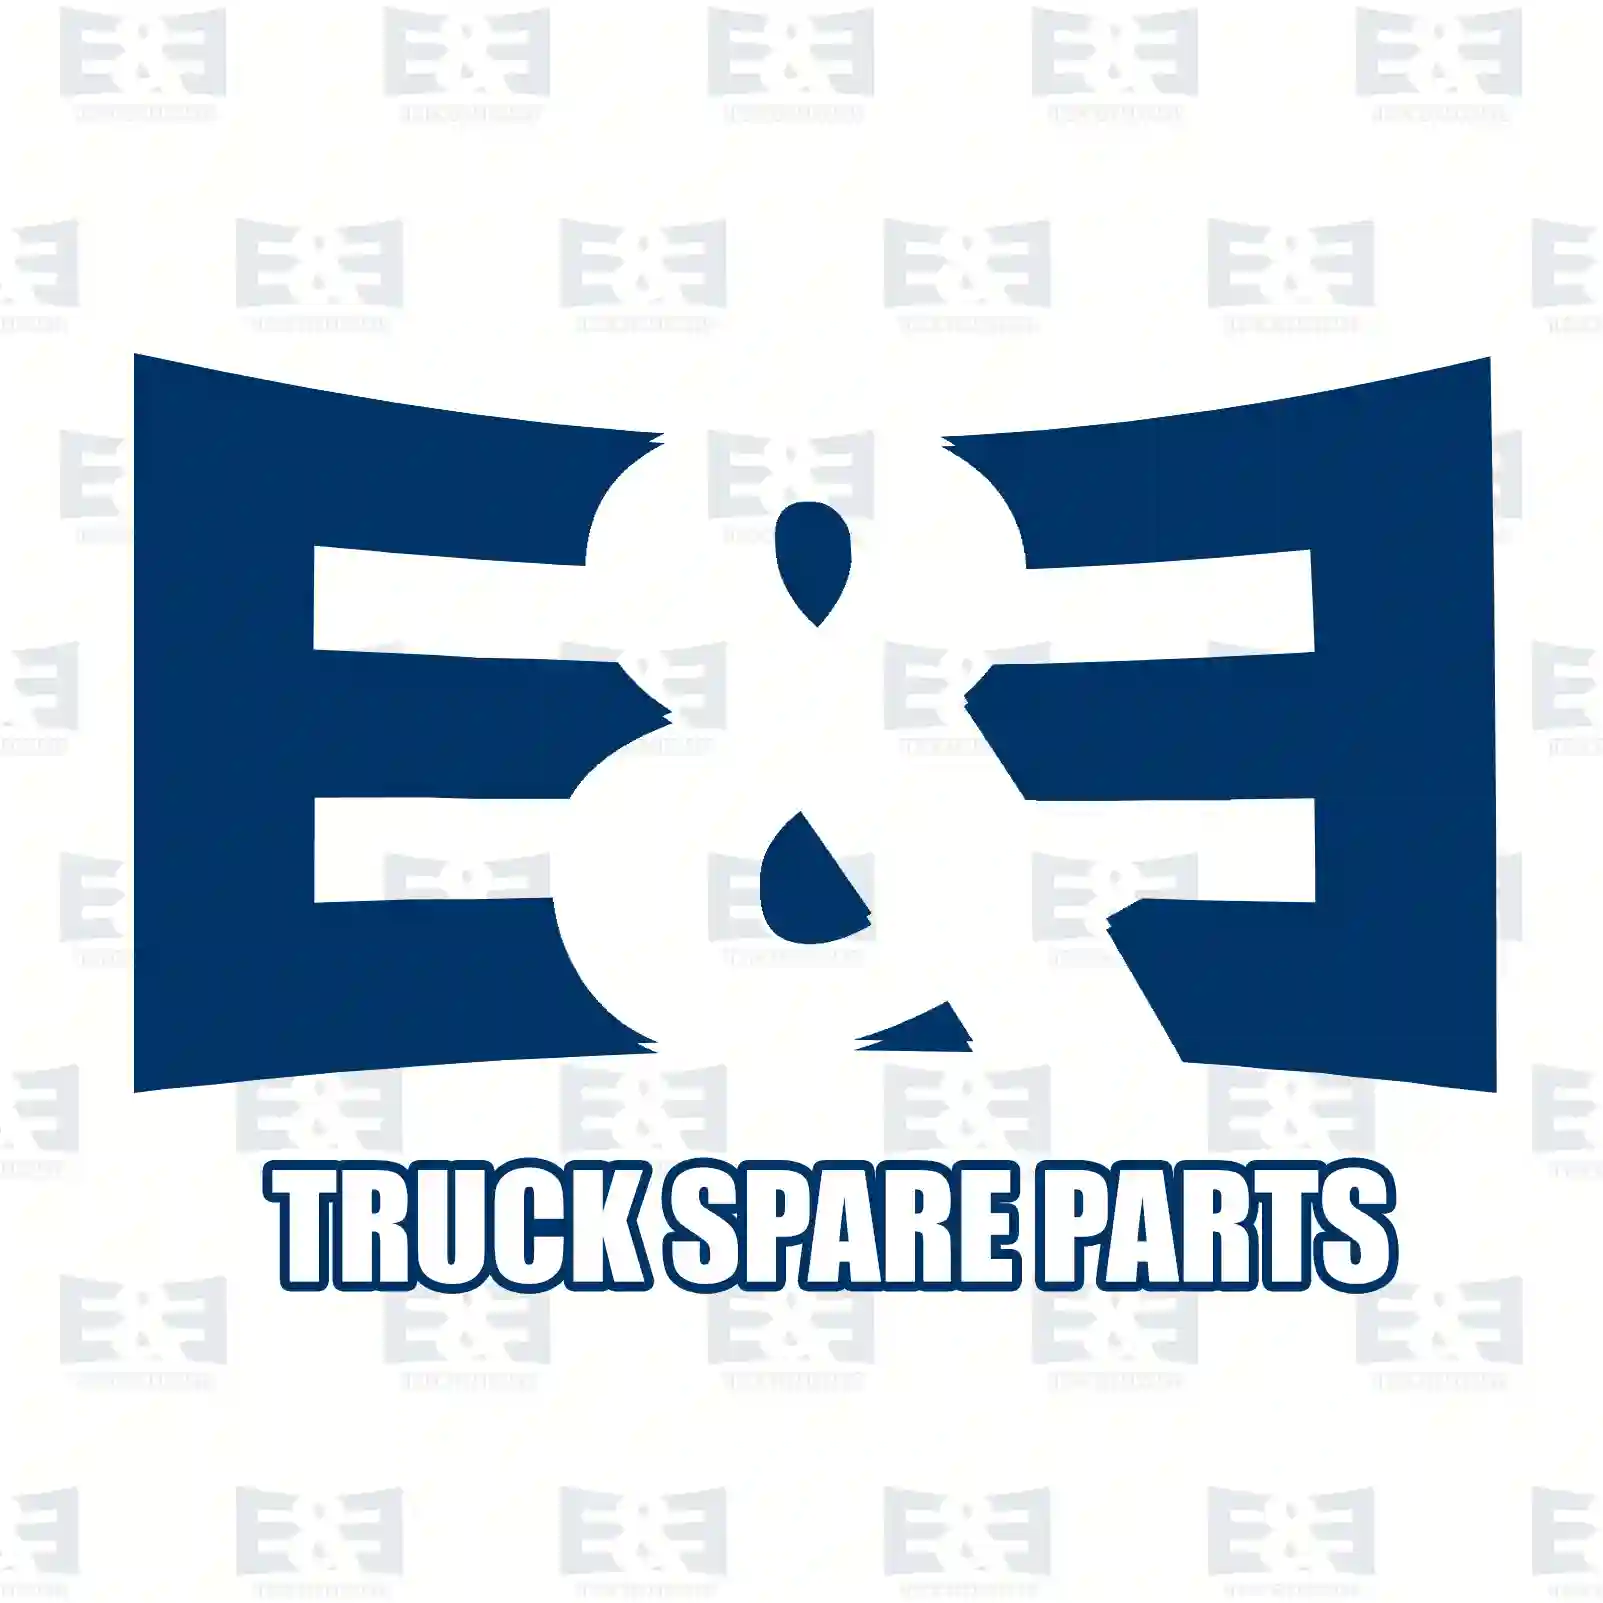  Spacer sleeve || E&E Truck Spare Parts | Truck Spare Parts, Auotomotive Spare Parts